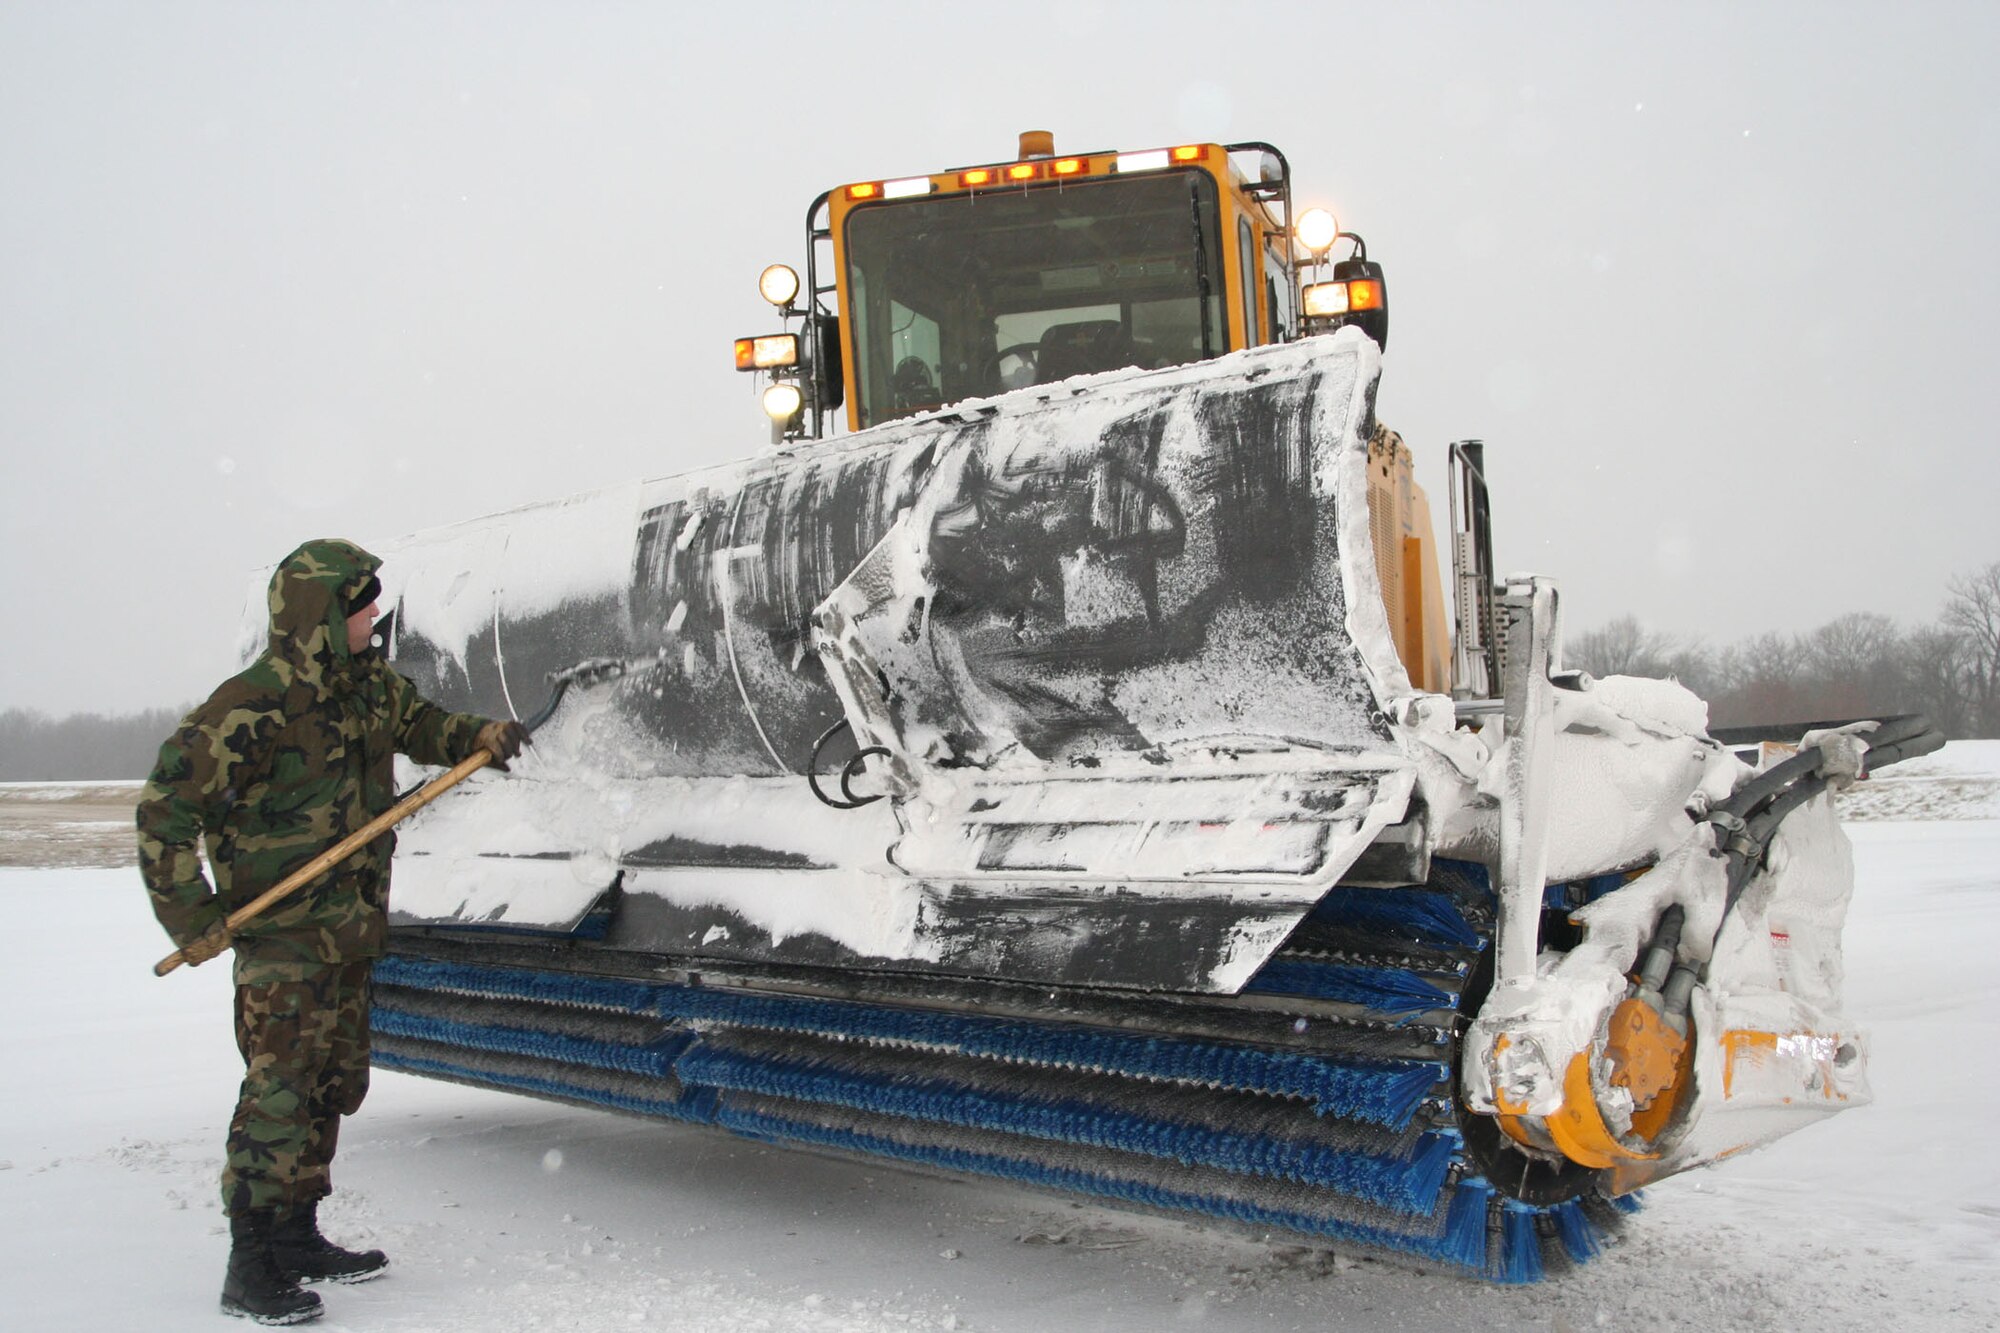 WHITEMAN AIR FORCE BASE, Mo. – Staff Sgt. Kevin Steinke, 509th Civil Engineer Squadron, scrapes snow and ice form the guard of a brush truck to prevent the rotating brush from jamming. The 509 CES snow removal crew applies a special chemical to the surface of the taxiway and runway prior to expected snow fall to ease removal process. (U.S. Air Force photo/Maj. Joe DellaVedova)